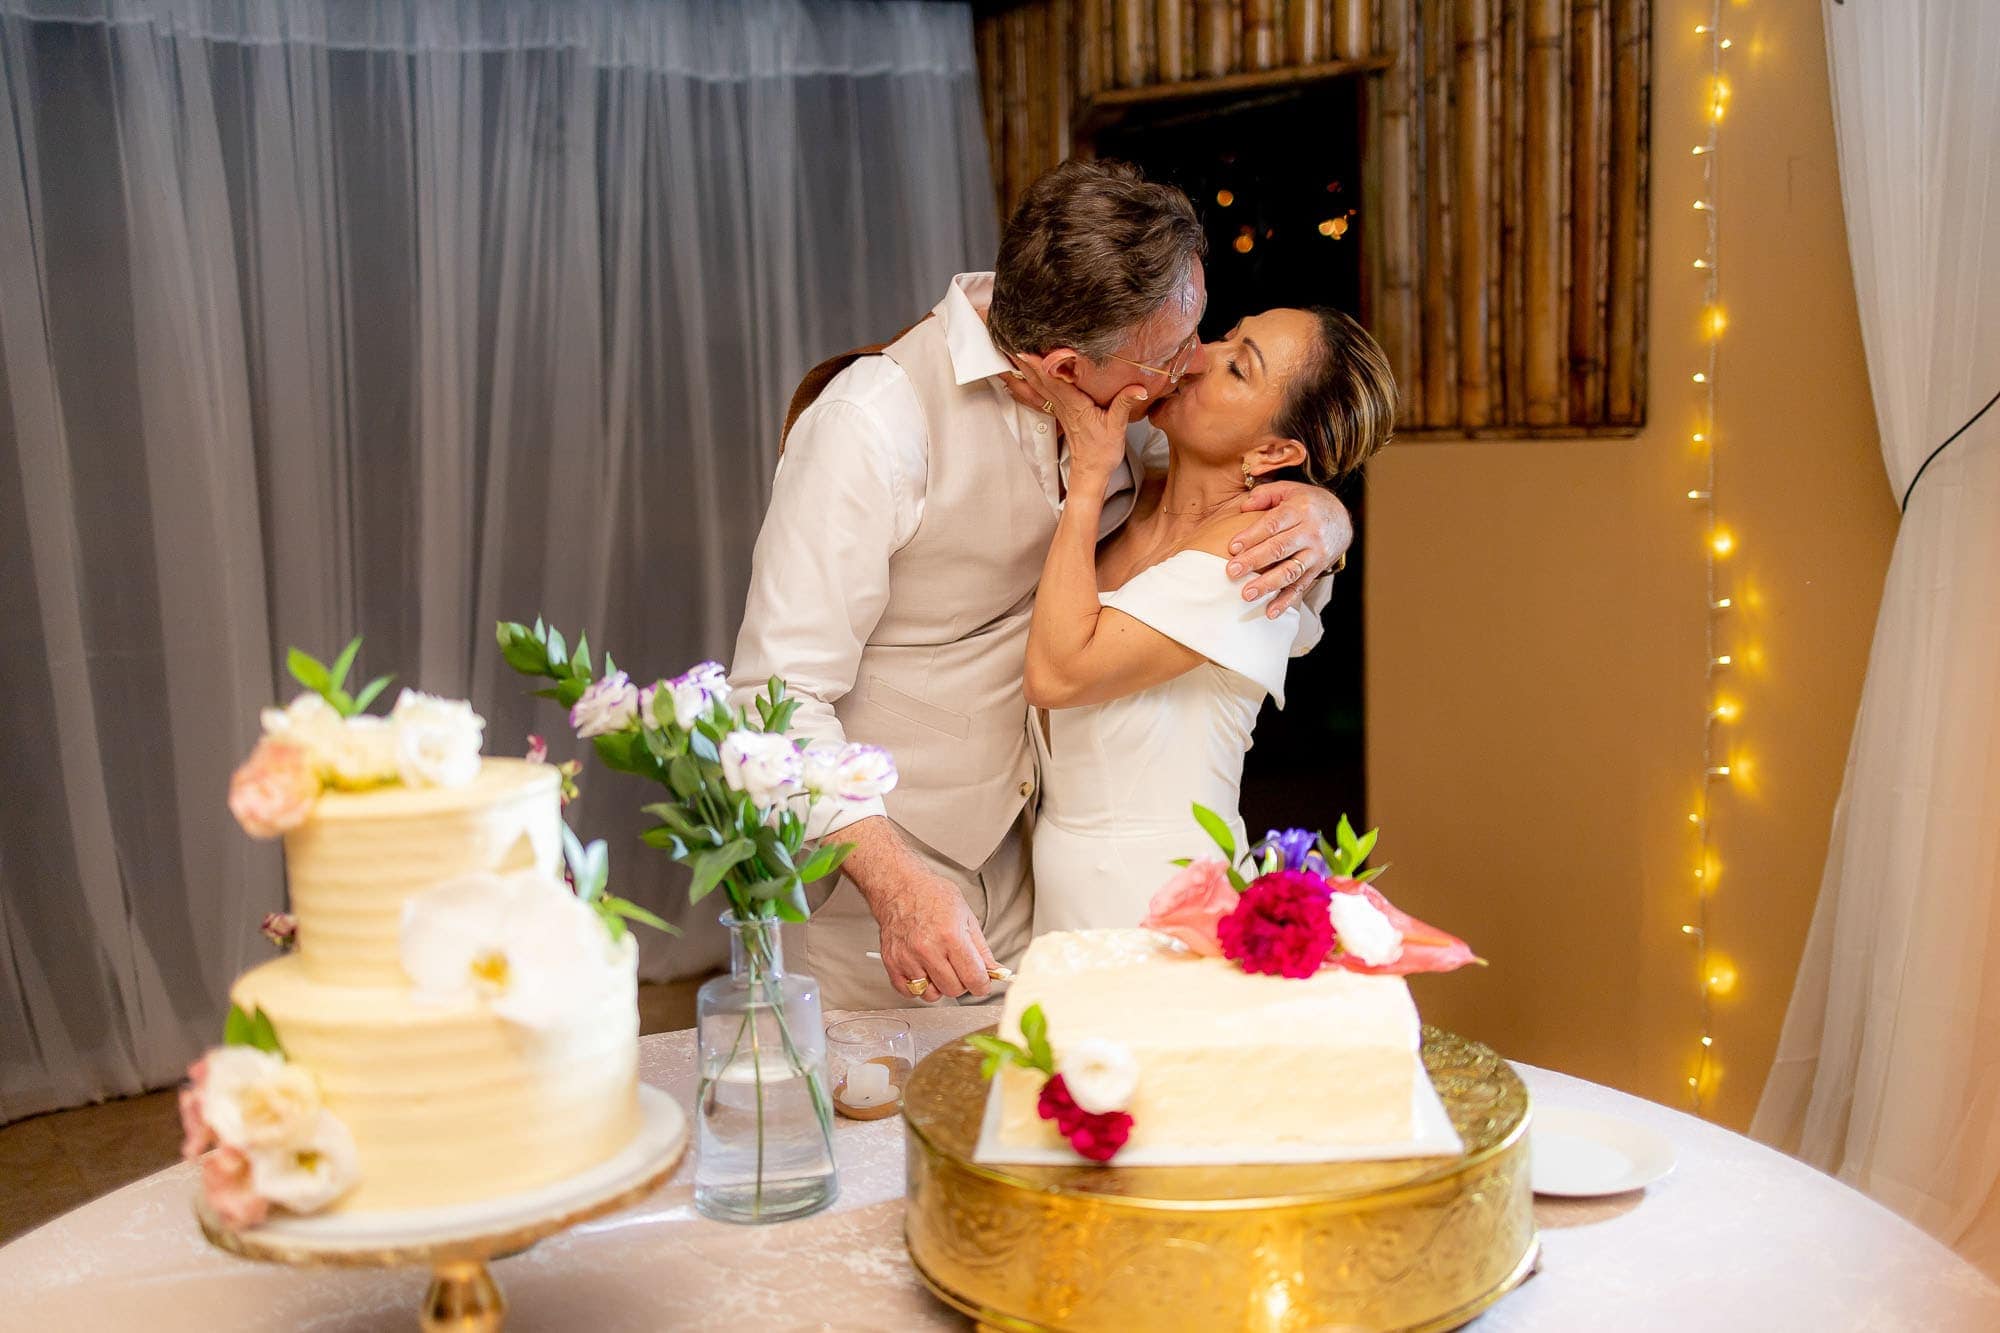 The bride and groom share a kiss with the cake